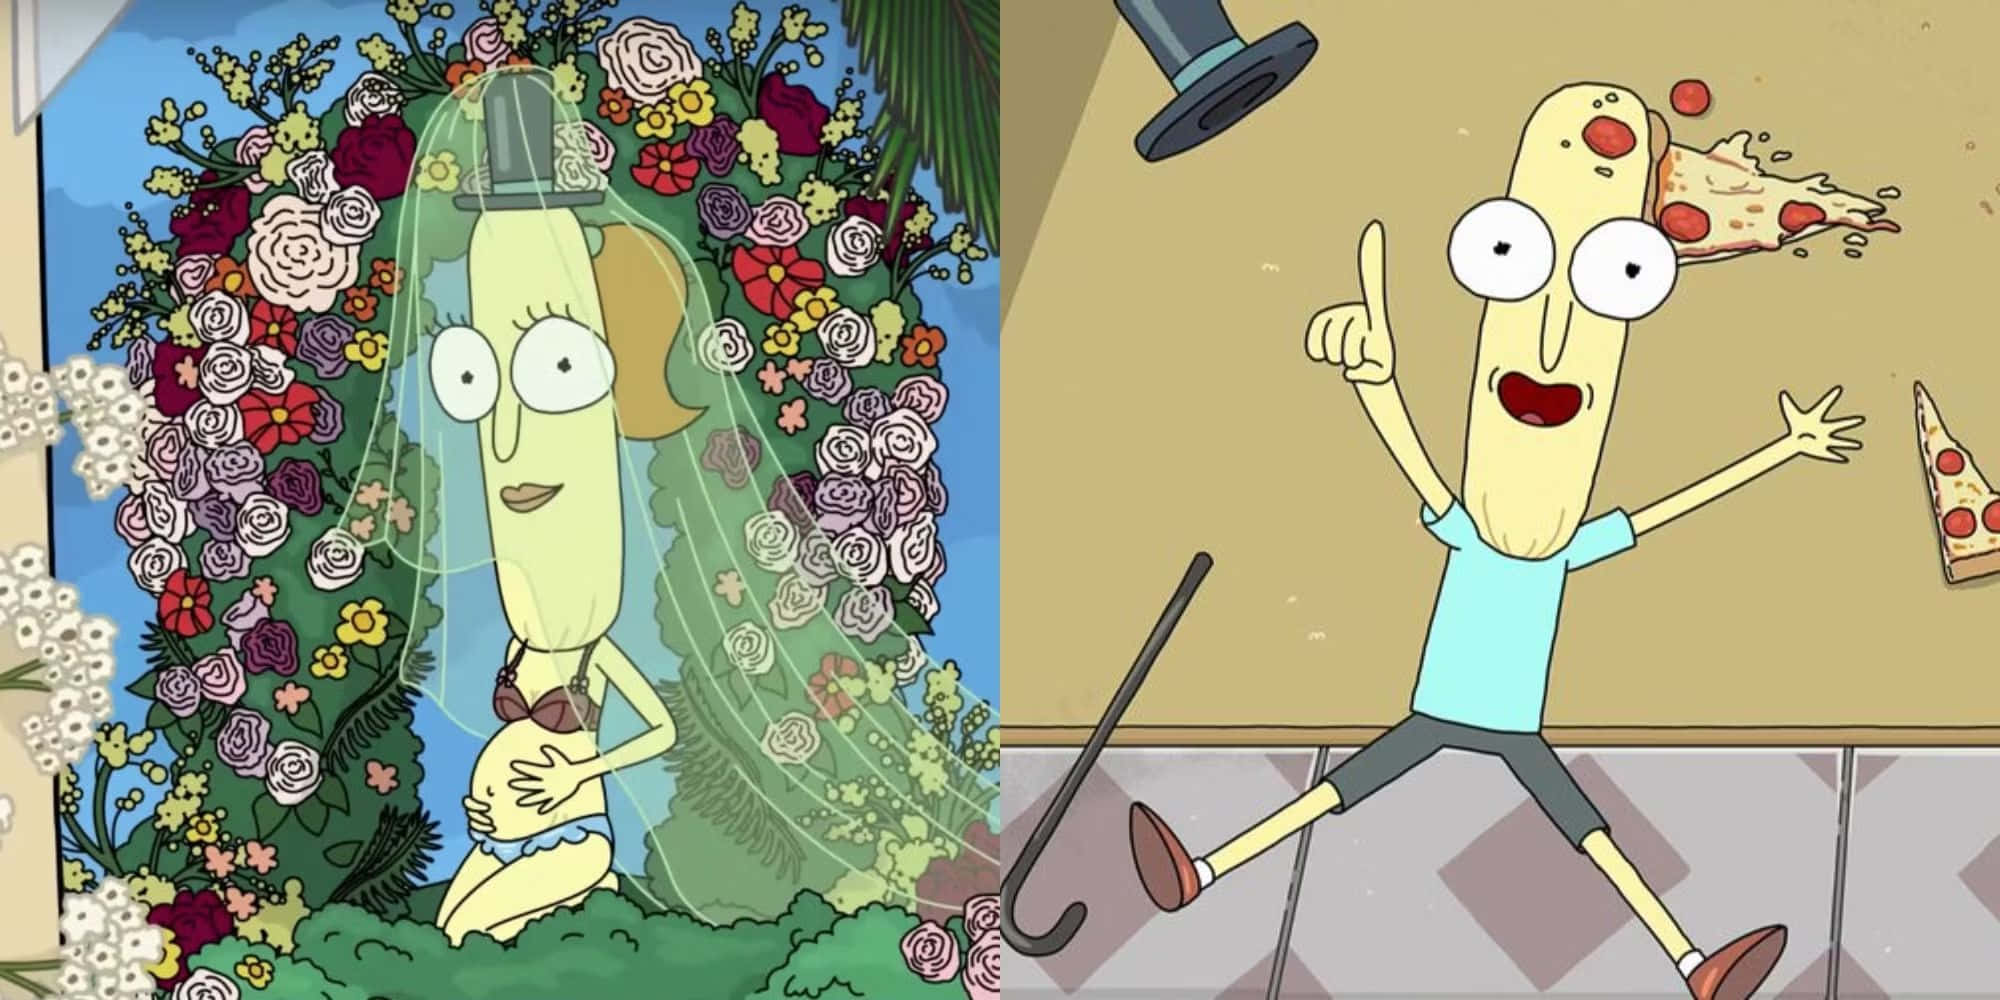 An adventurous Mr. Poopybutthole in a colorful world Wallpaper